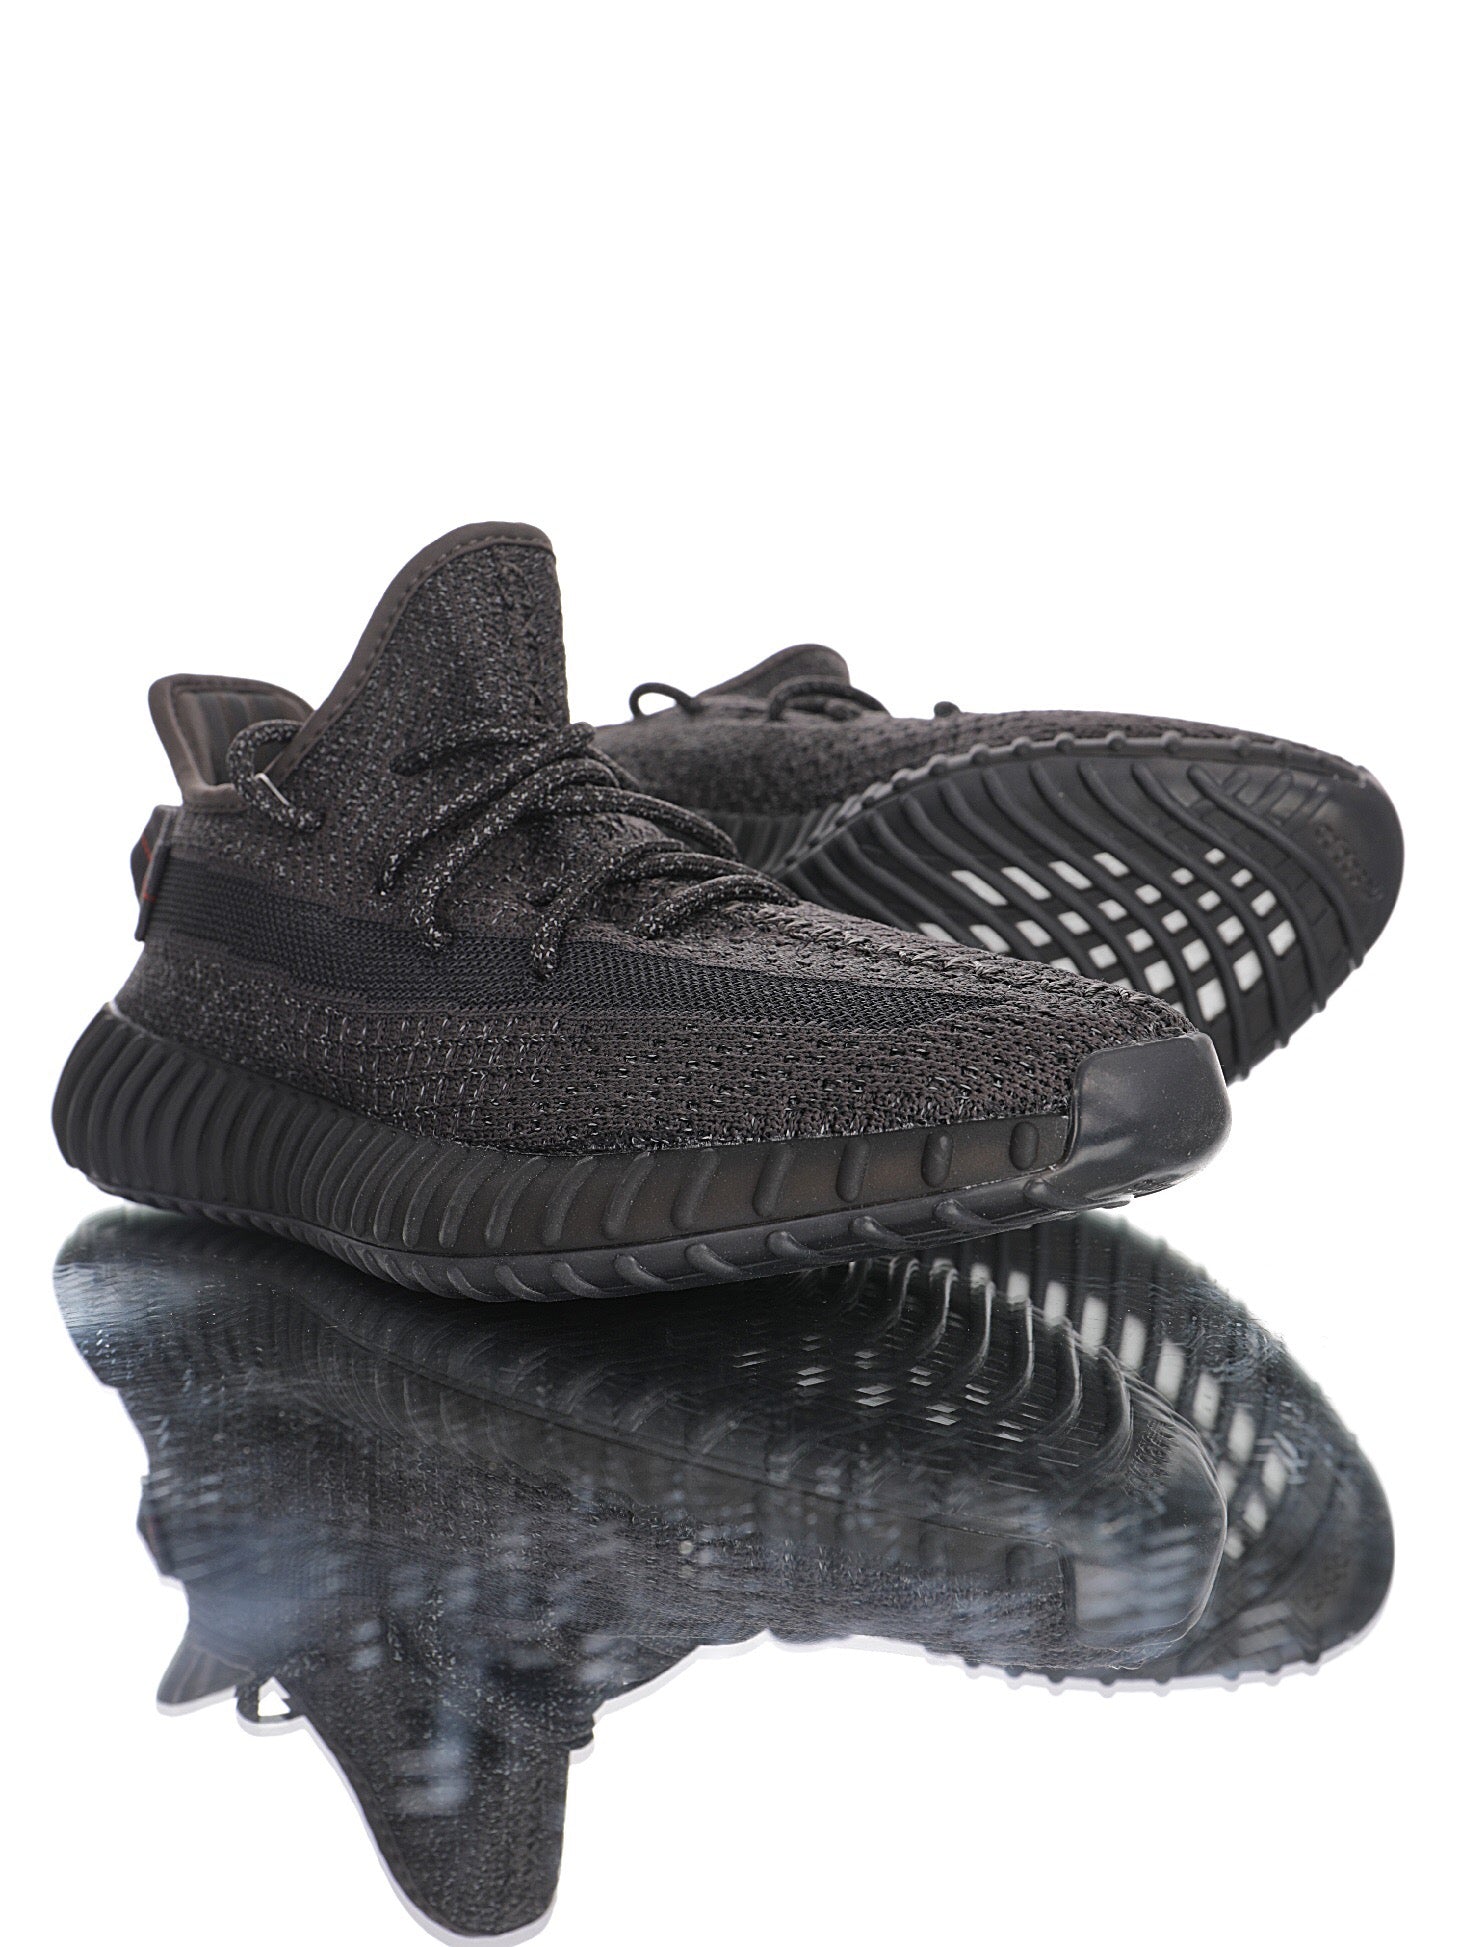 Adidas Yeezy Boost 350 v2 Sneakers Shoes